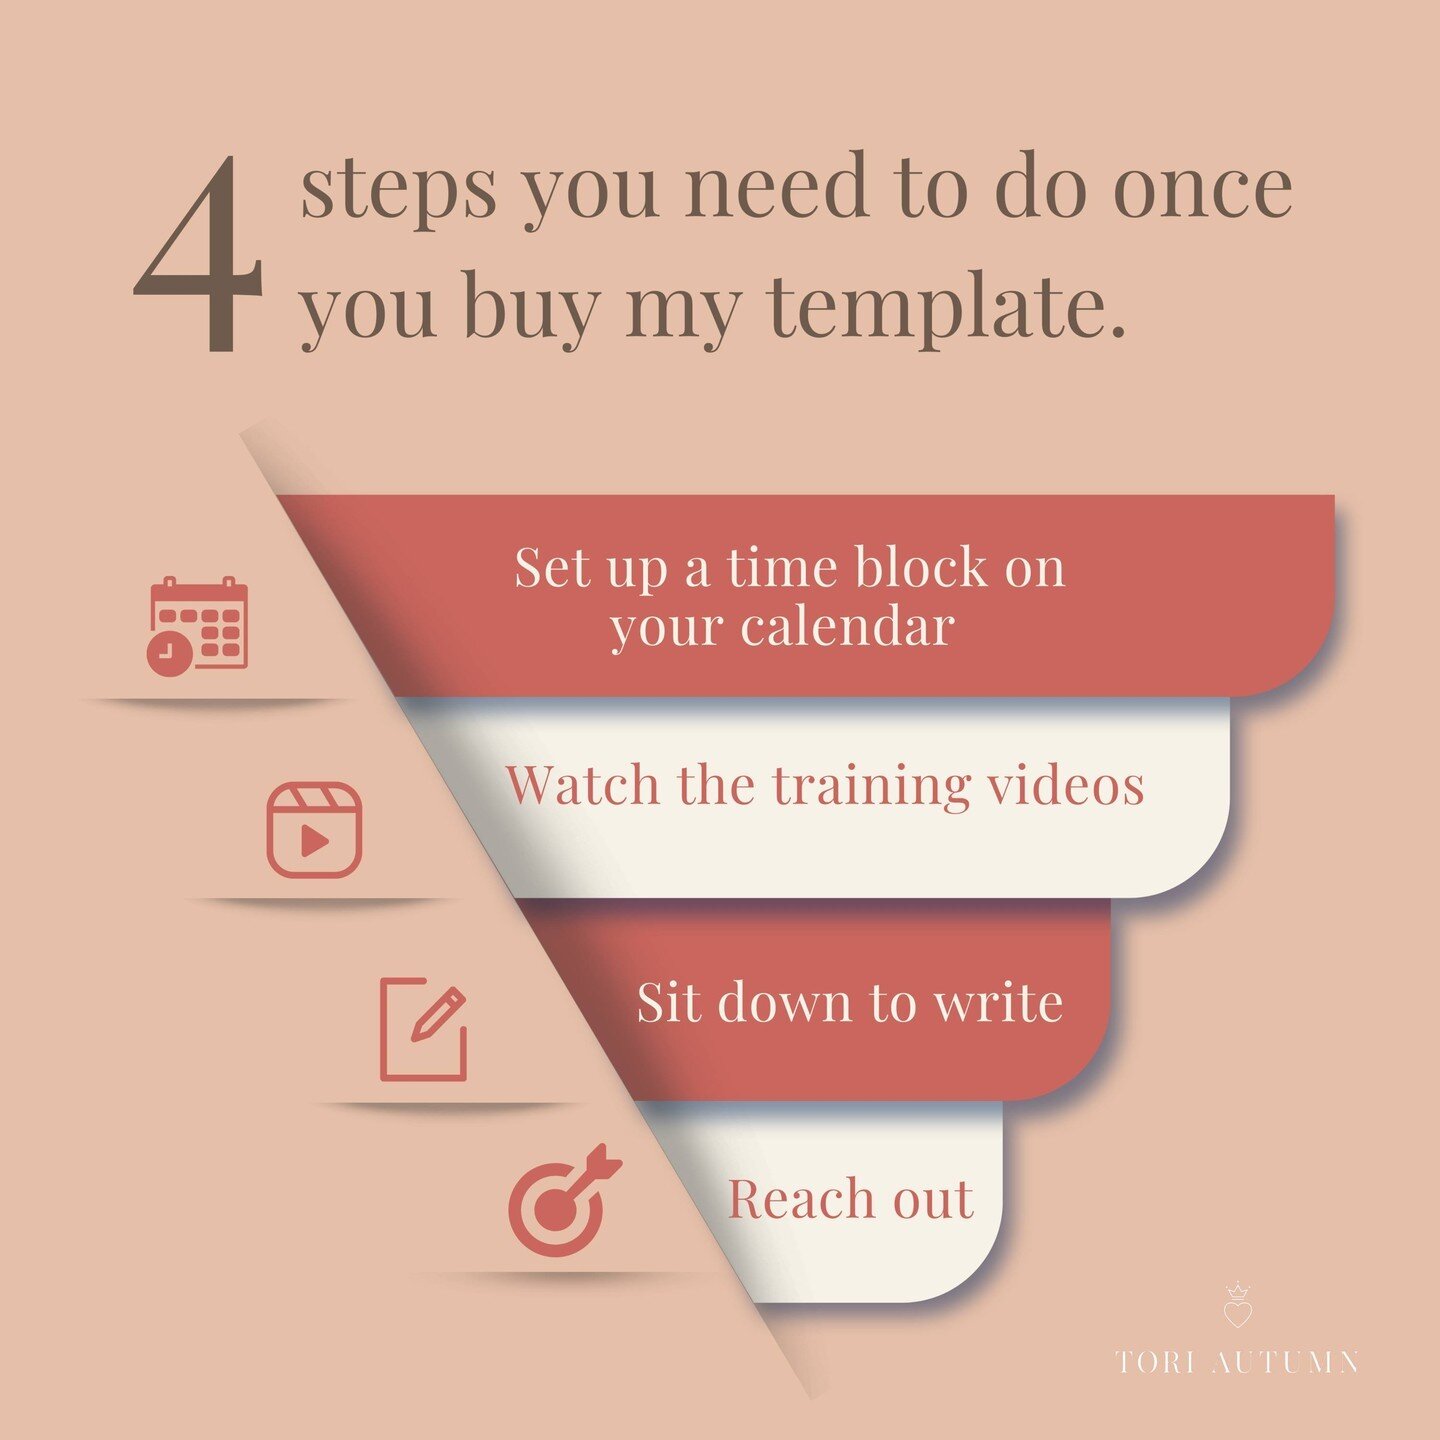 Here&rsquo;s a step-by-step breakdown of what you need to do once you buy my templates👇🏽

Step 1: 

Set up a time block on your calendar. 

Do this to get the most ROI out of the templates you receive. 

-

Step 2:

Watch the training videos.

Do n